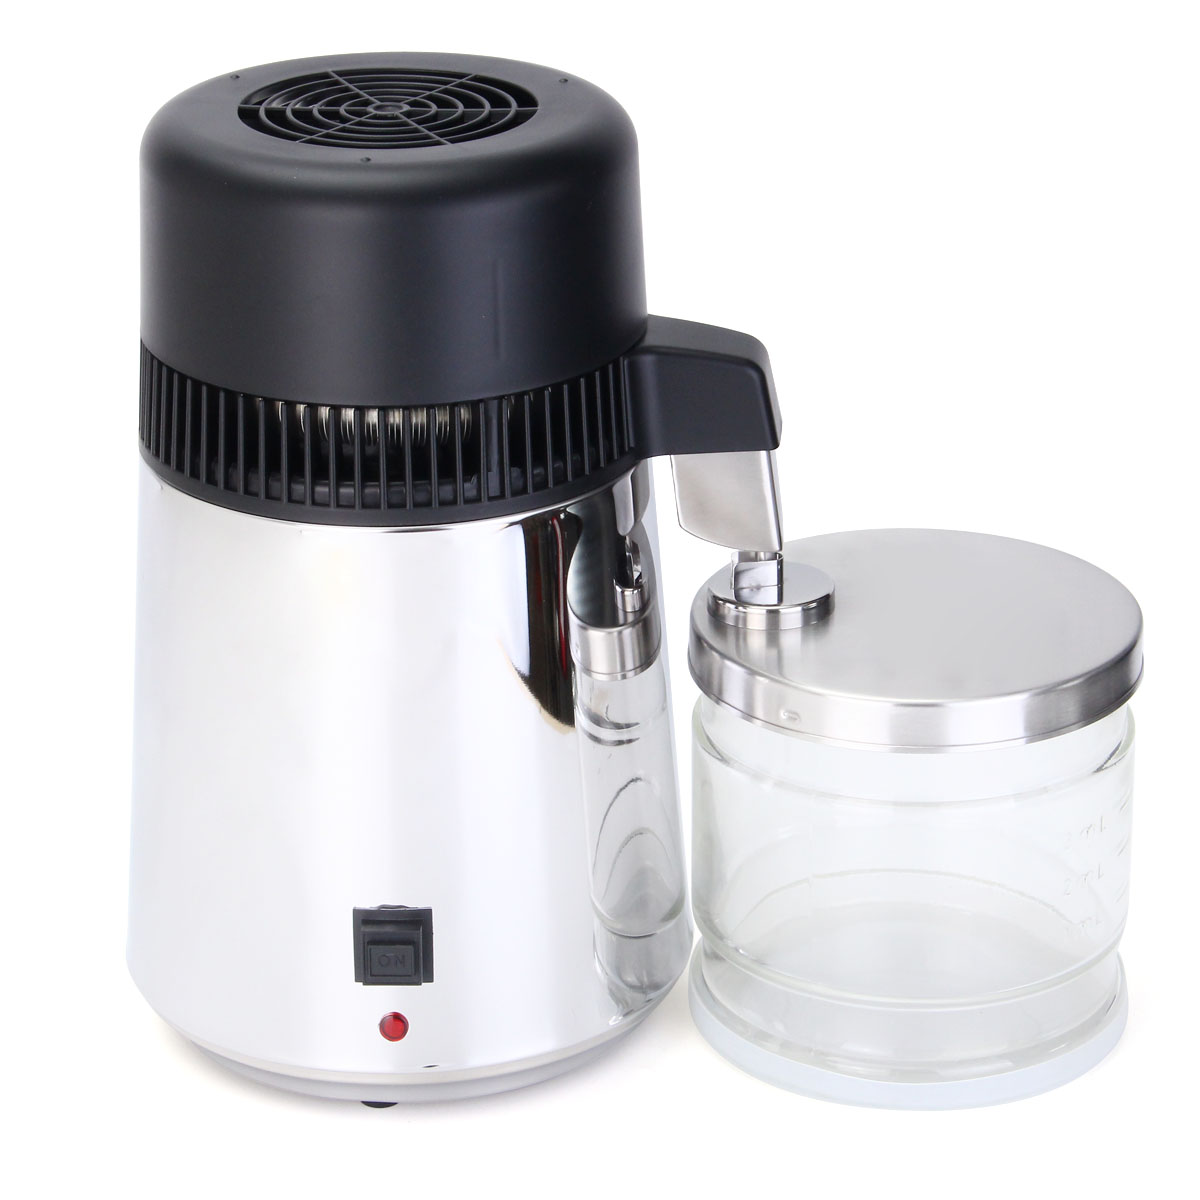 

110V 4L Pure Water Distiller 750W Stainless Steel Purifier Filter Machine w/ Glass Container